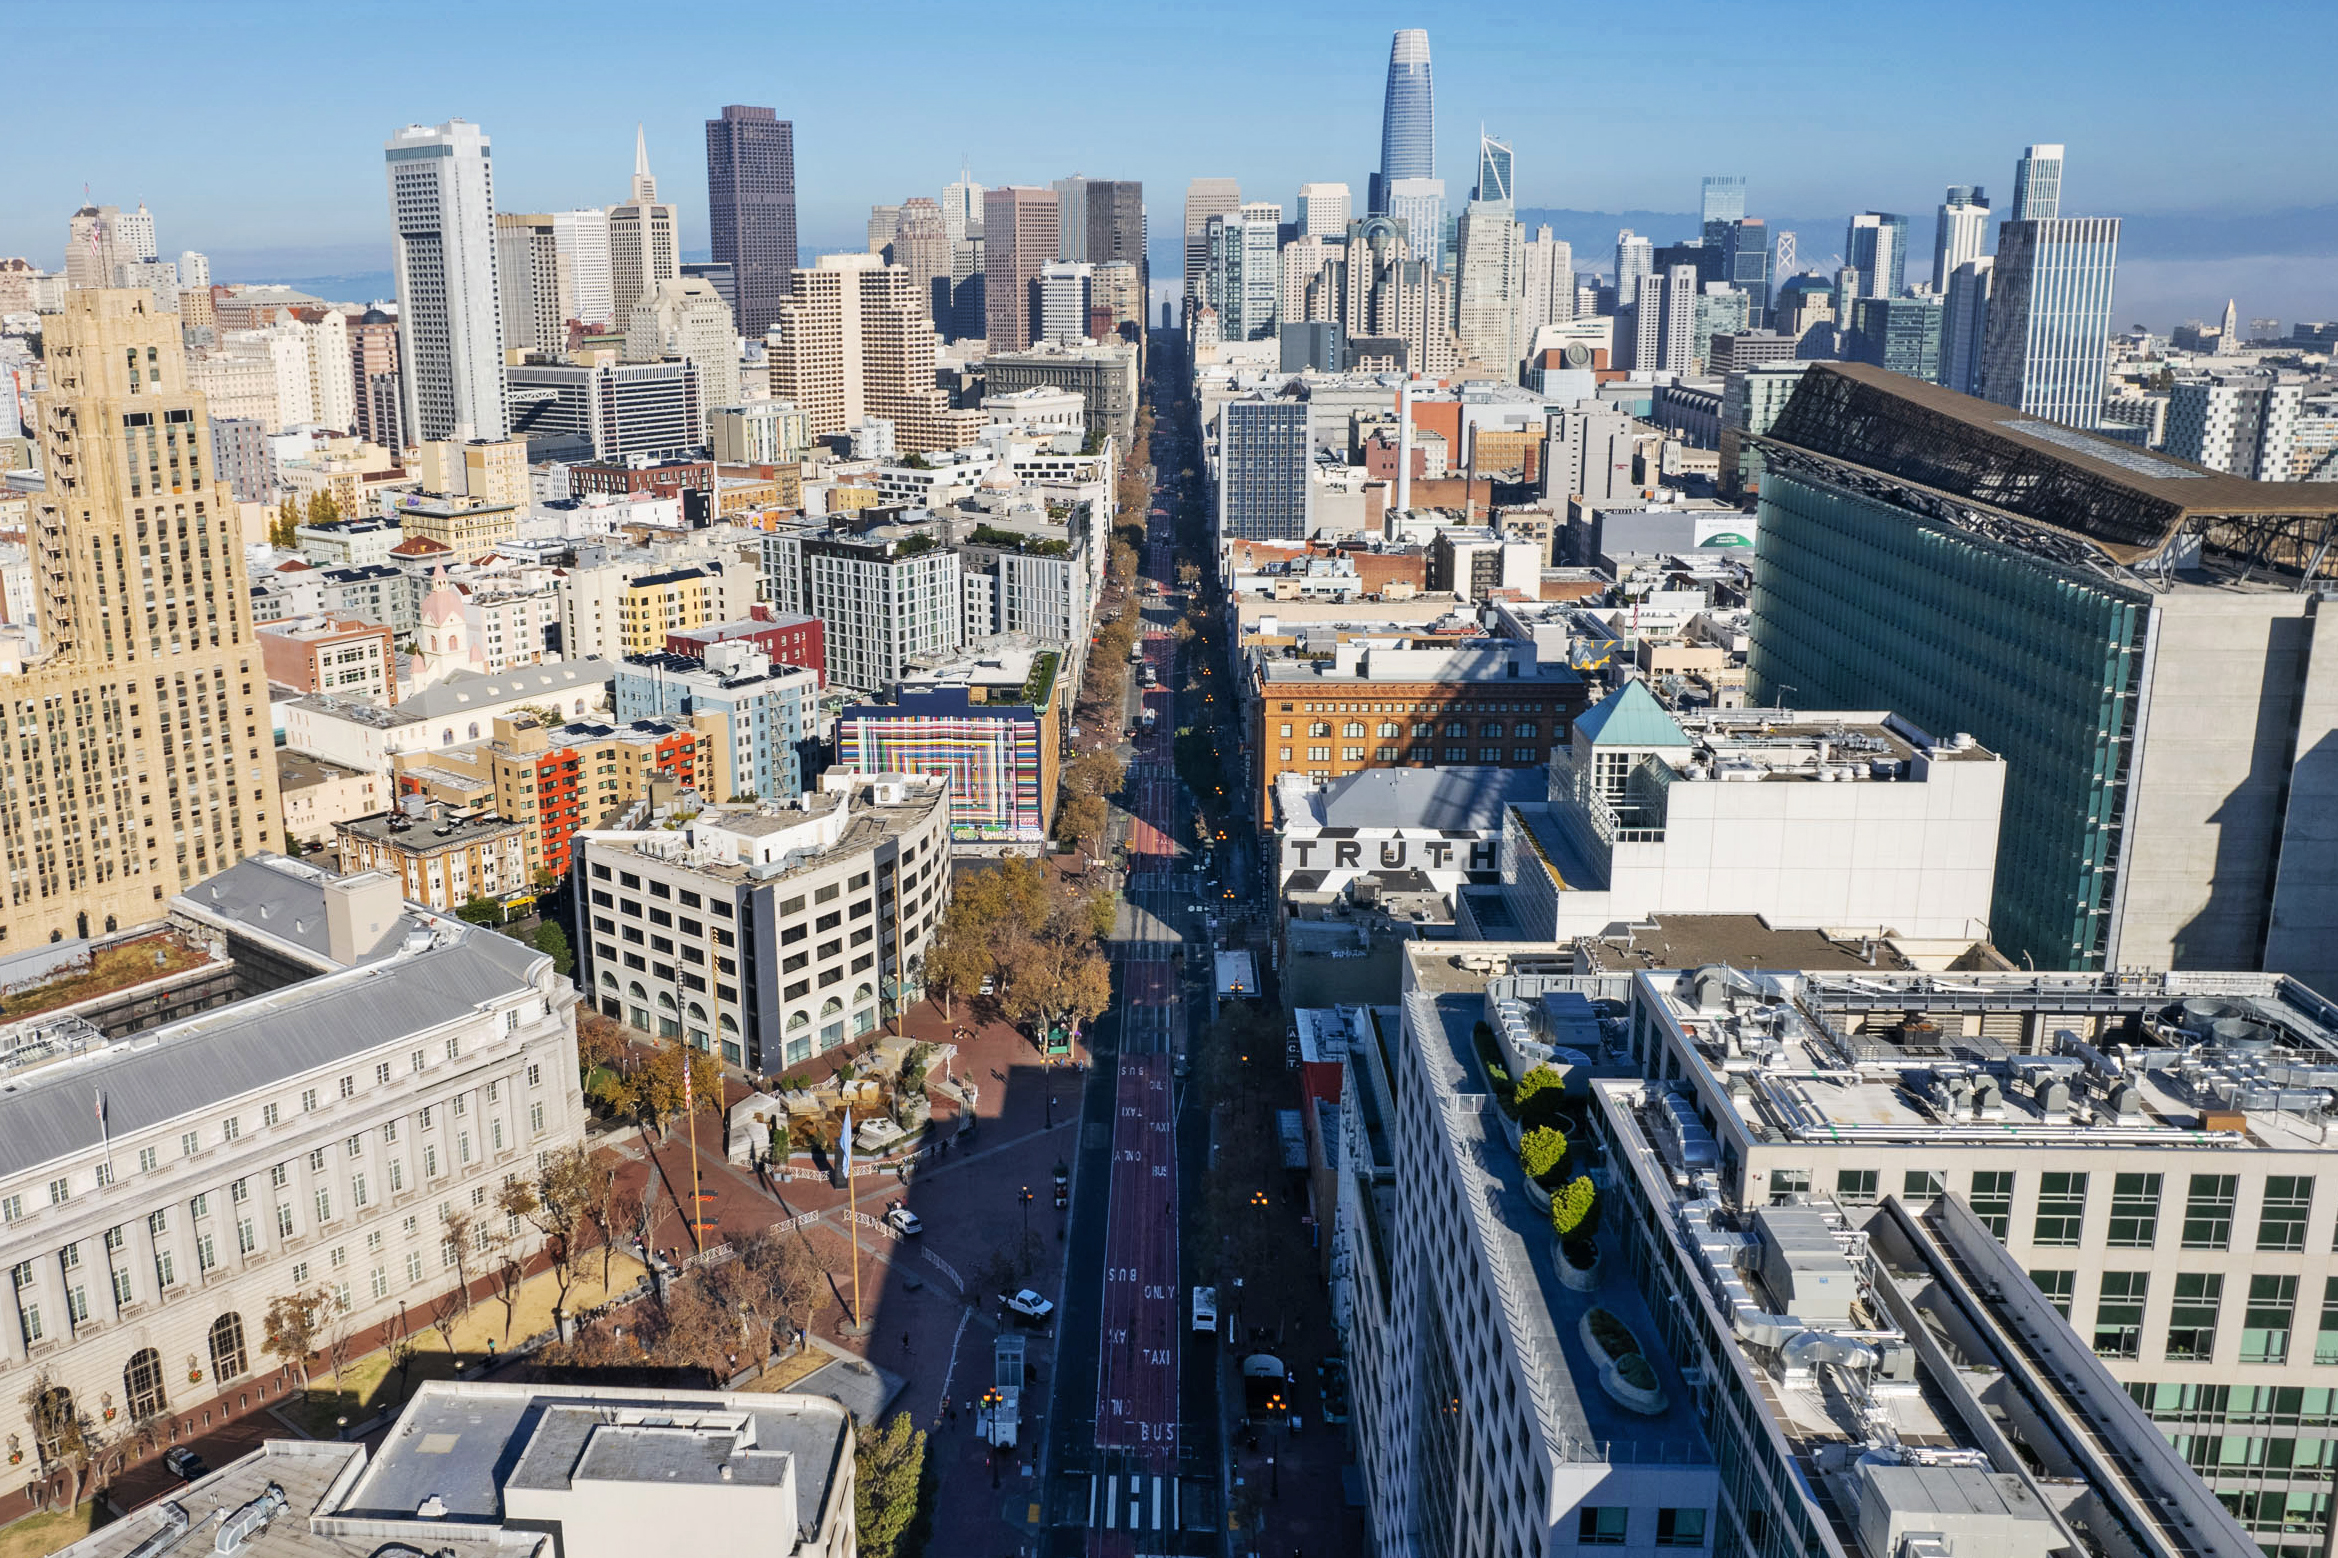 Aerial view of a dense urban cityscape with a mix of high-rise buildings and a clear sky.